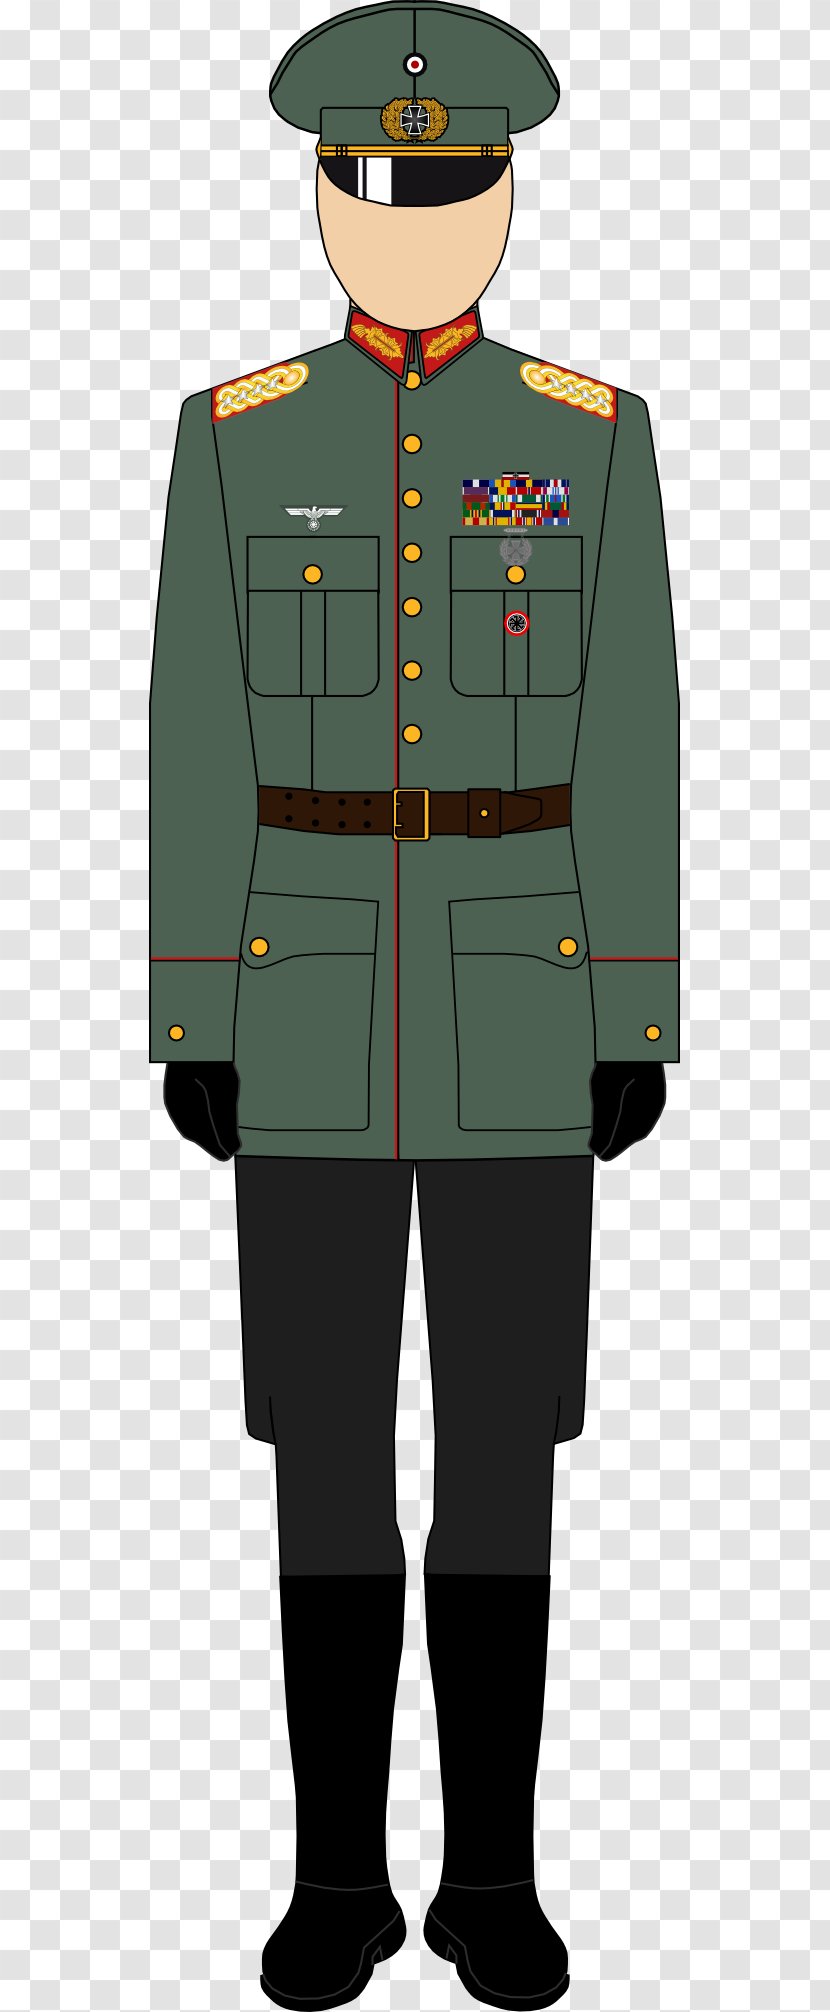 Military Uniform Army Officer Dress General Transparent PNG